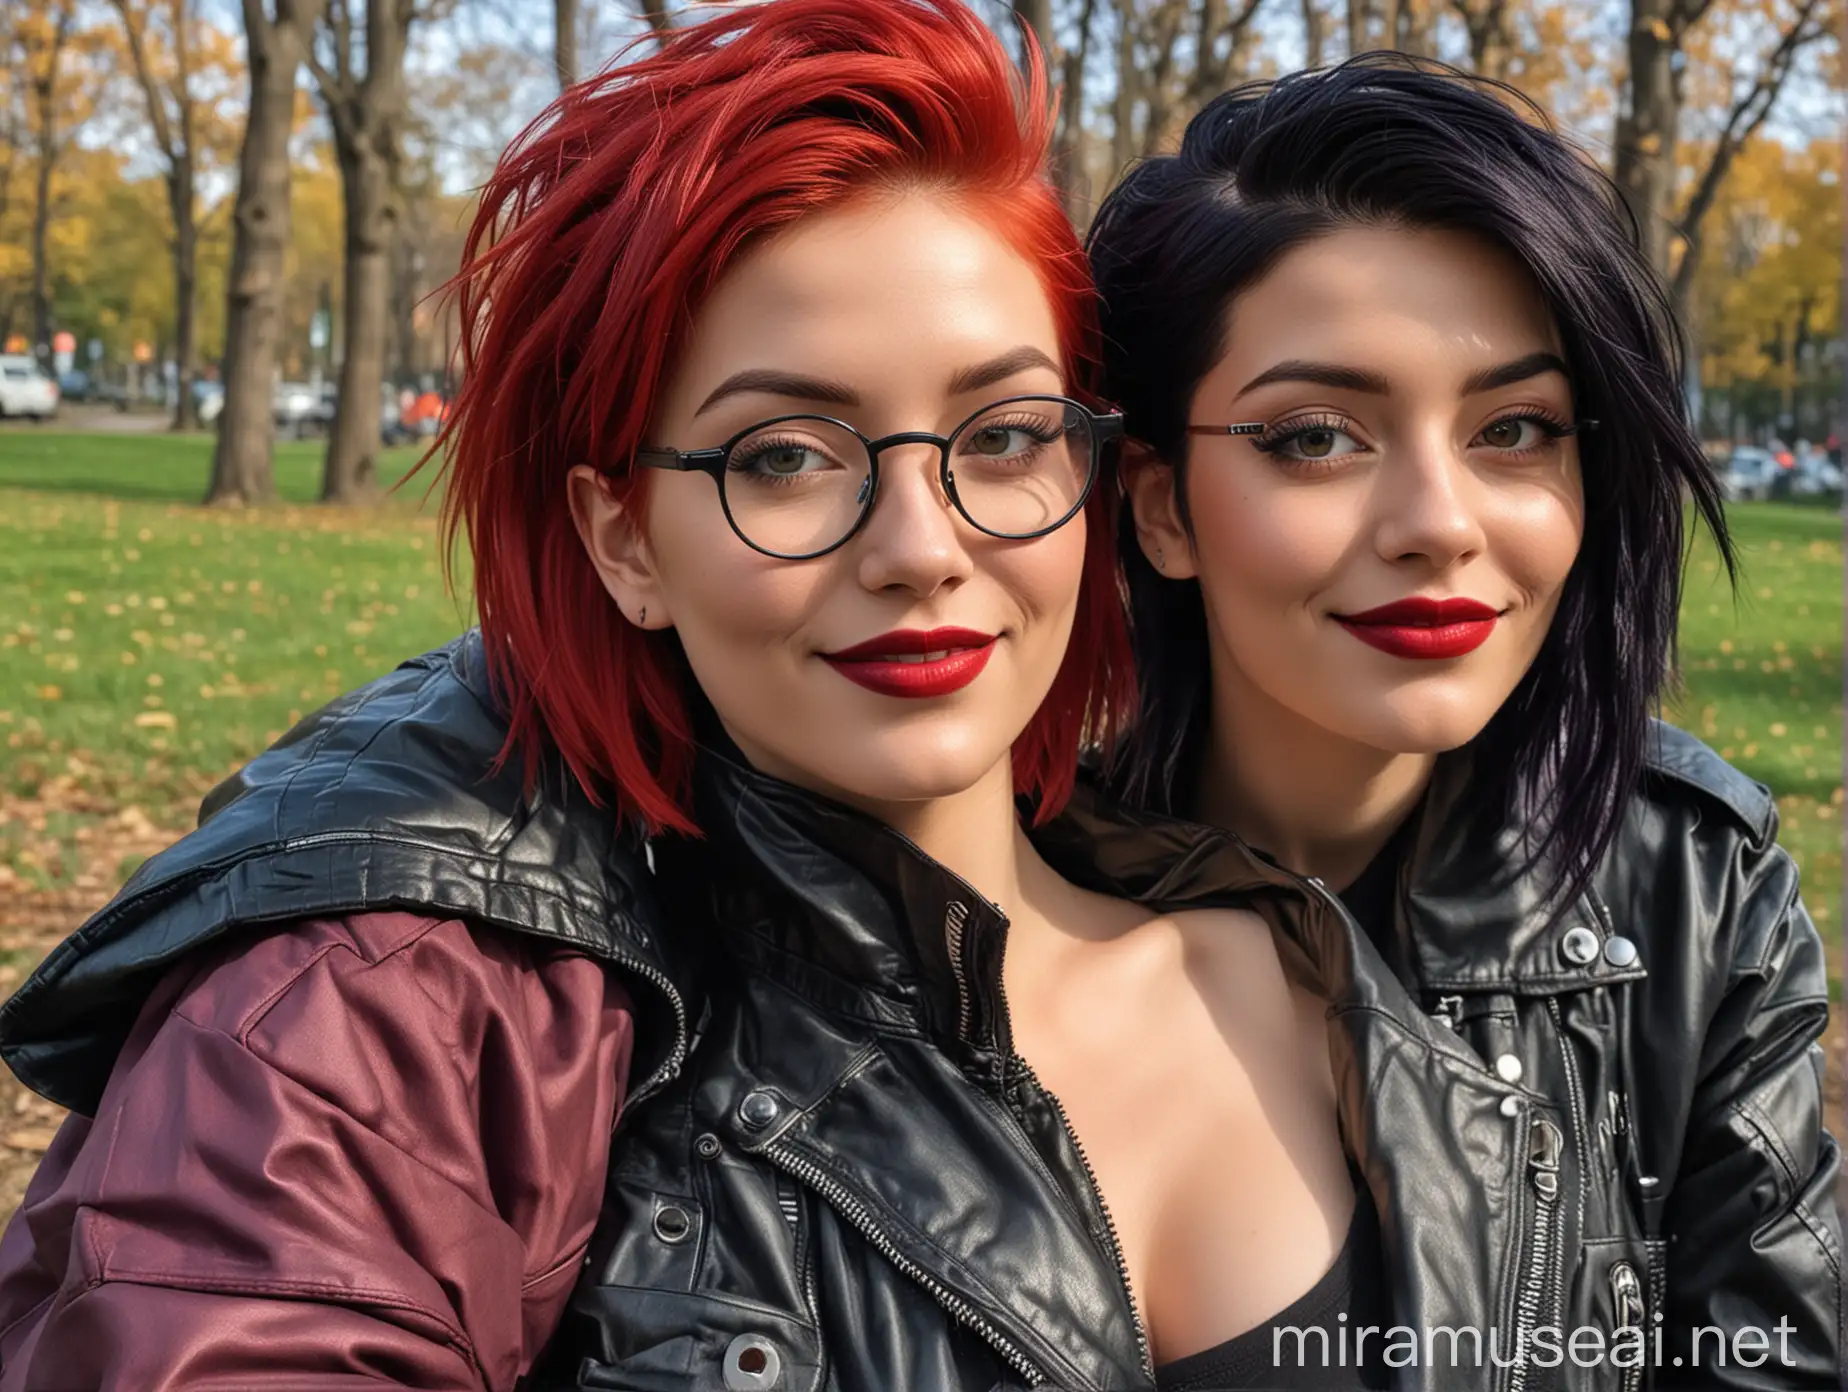 A woman has scarlet red hair resting on the right and, she wears a cyberpunk jacket opened, shaved side on the left, she has eyeglasses.
There is a second woman, she has black hair and dark lipstick.
they are smiling together in a park, in selfie style